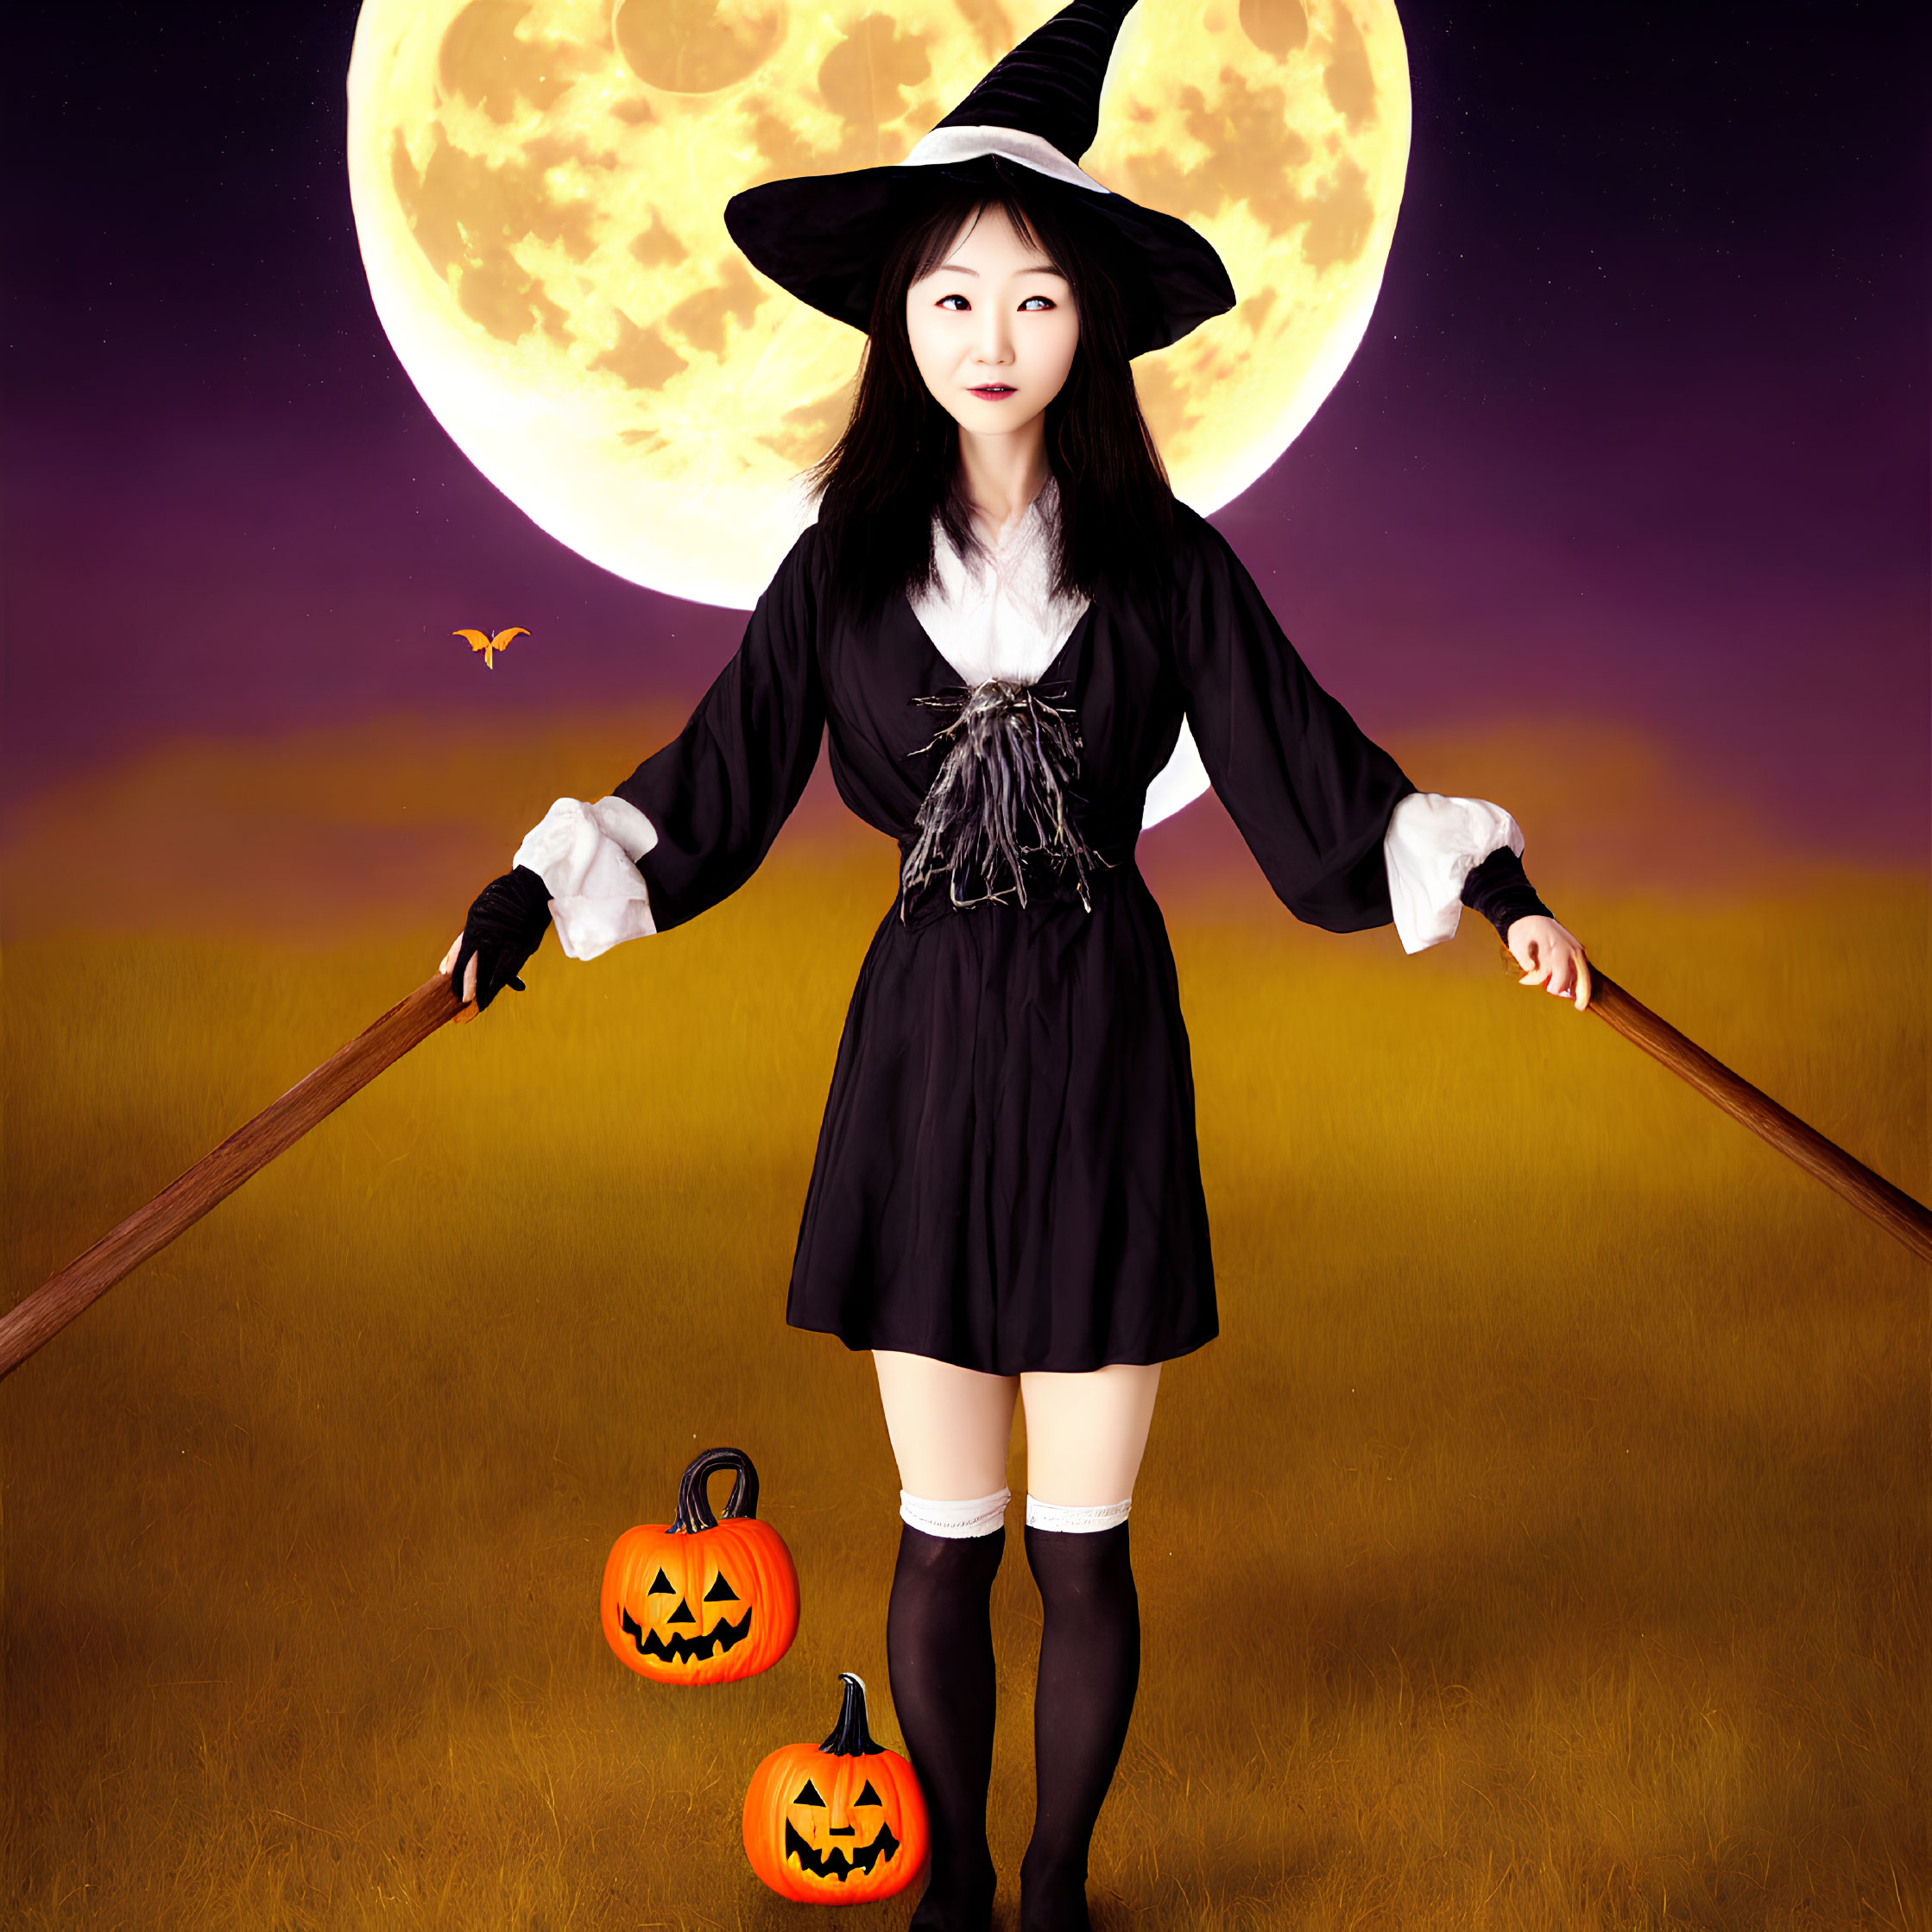 Woman in witch costume with broomstick, bats, and pumpkins under full moon